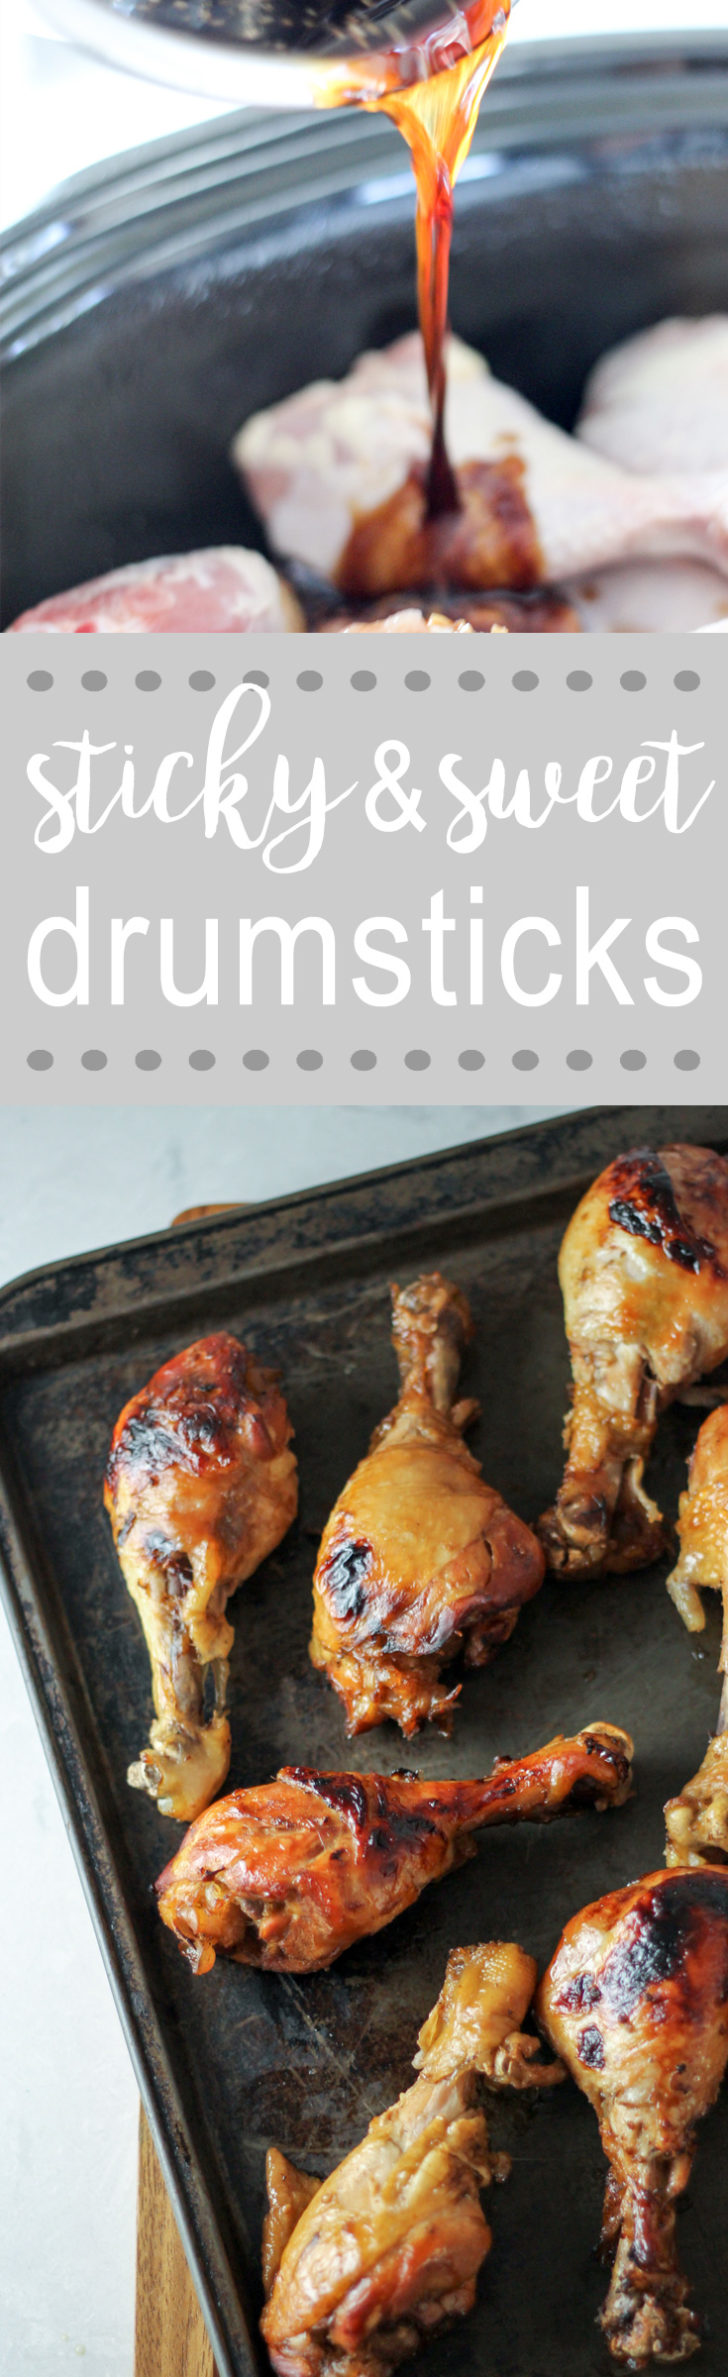 chicken drumsticks with sauce in crockpot and on baking sheet